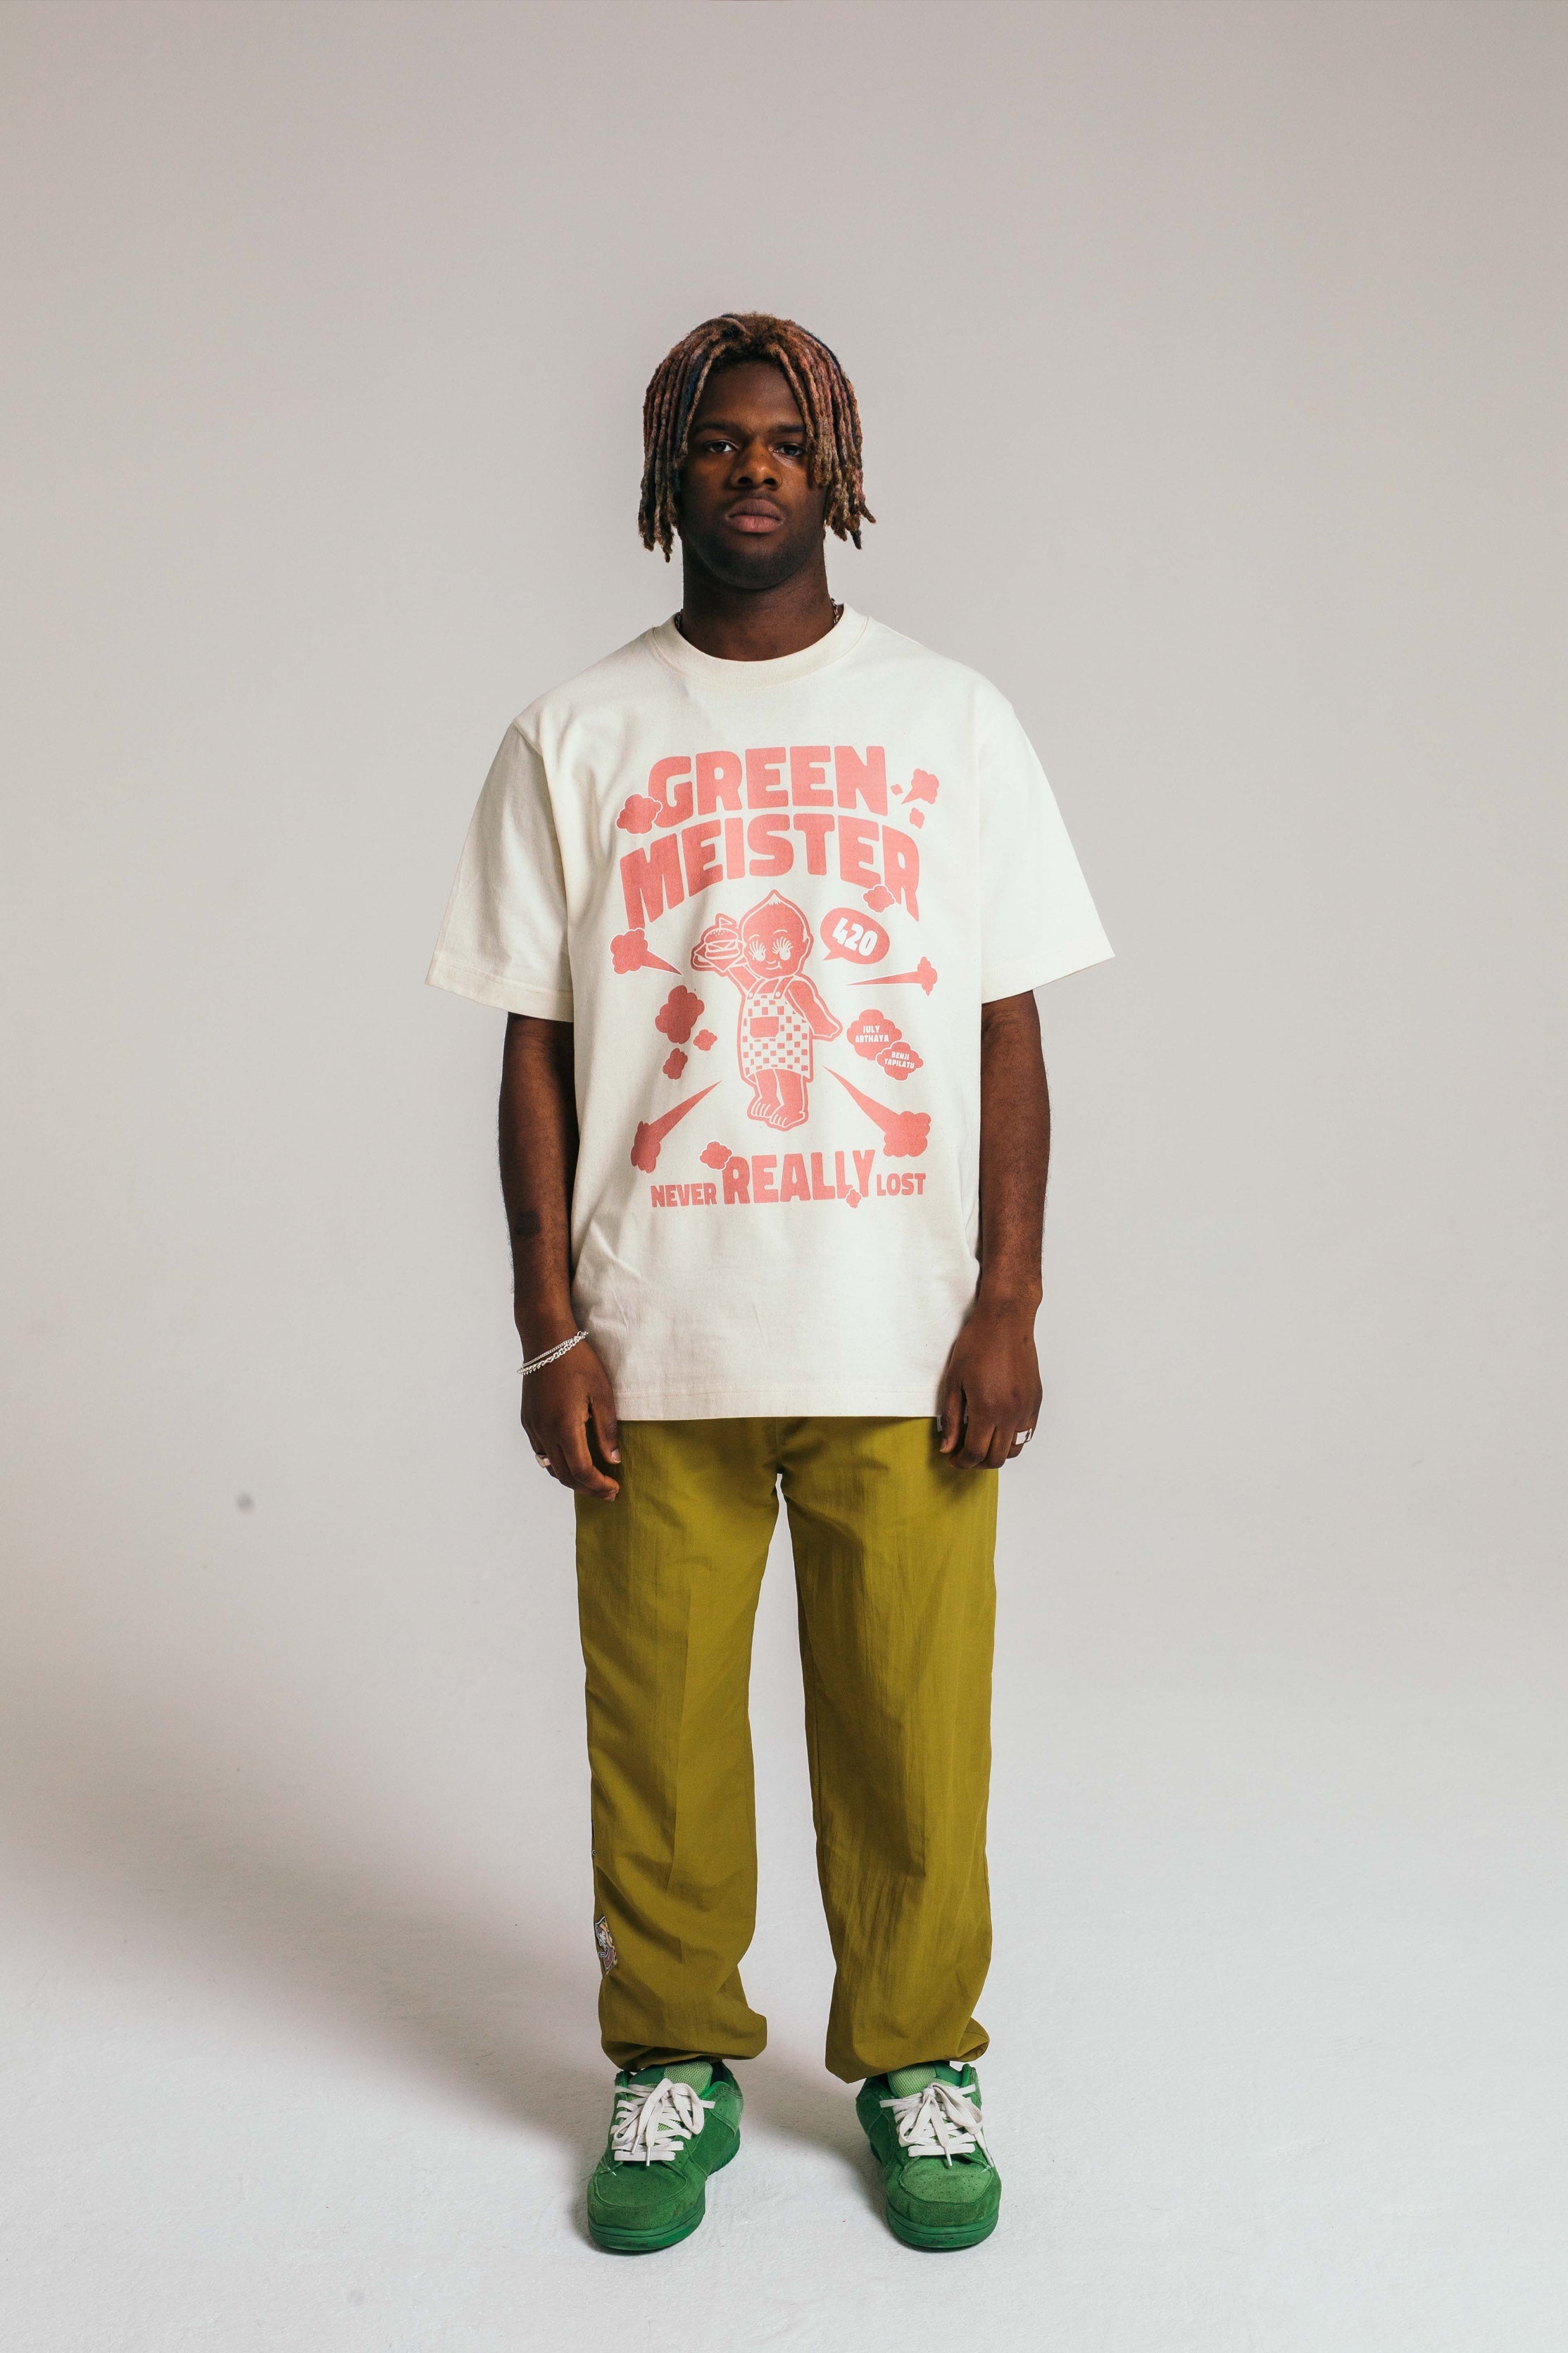 Never Really Lost Off White Big Boy Shirt – Greenmeister